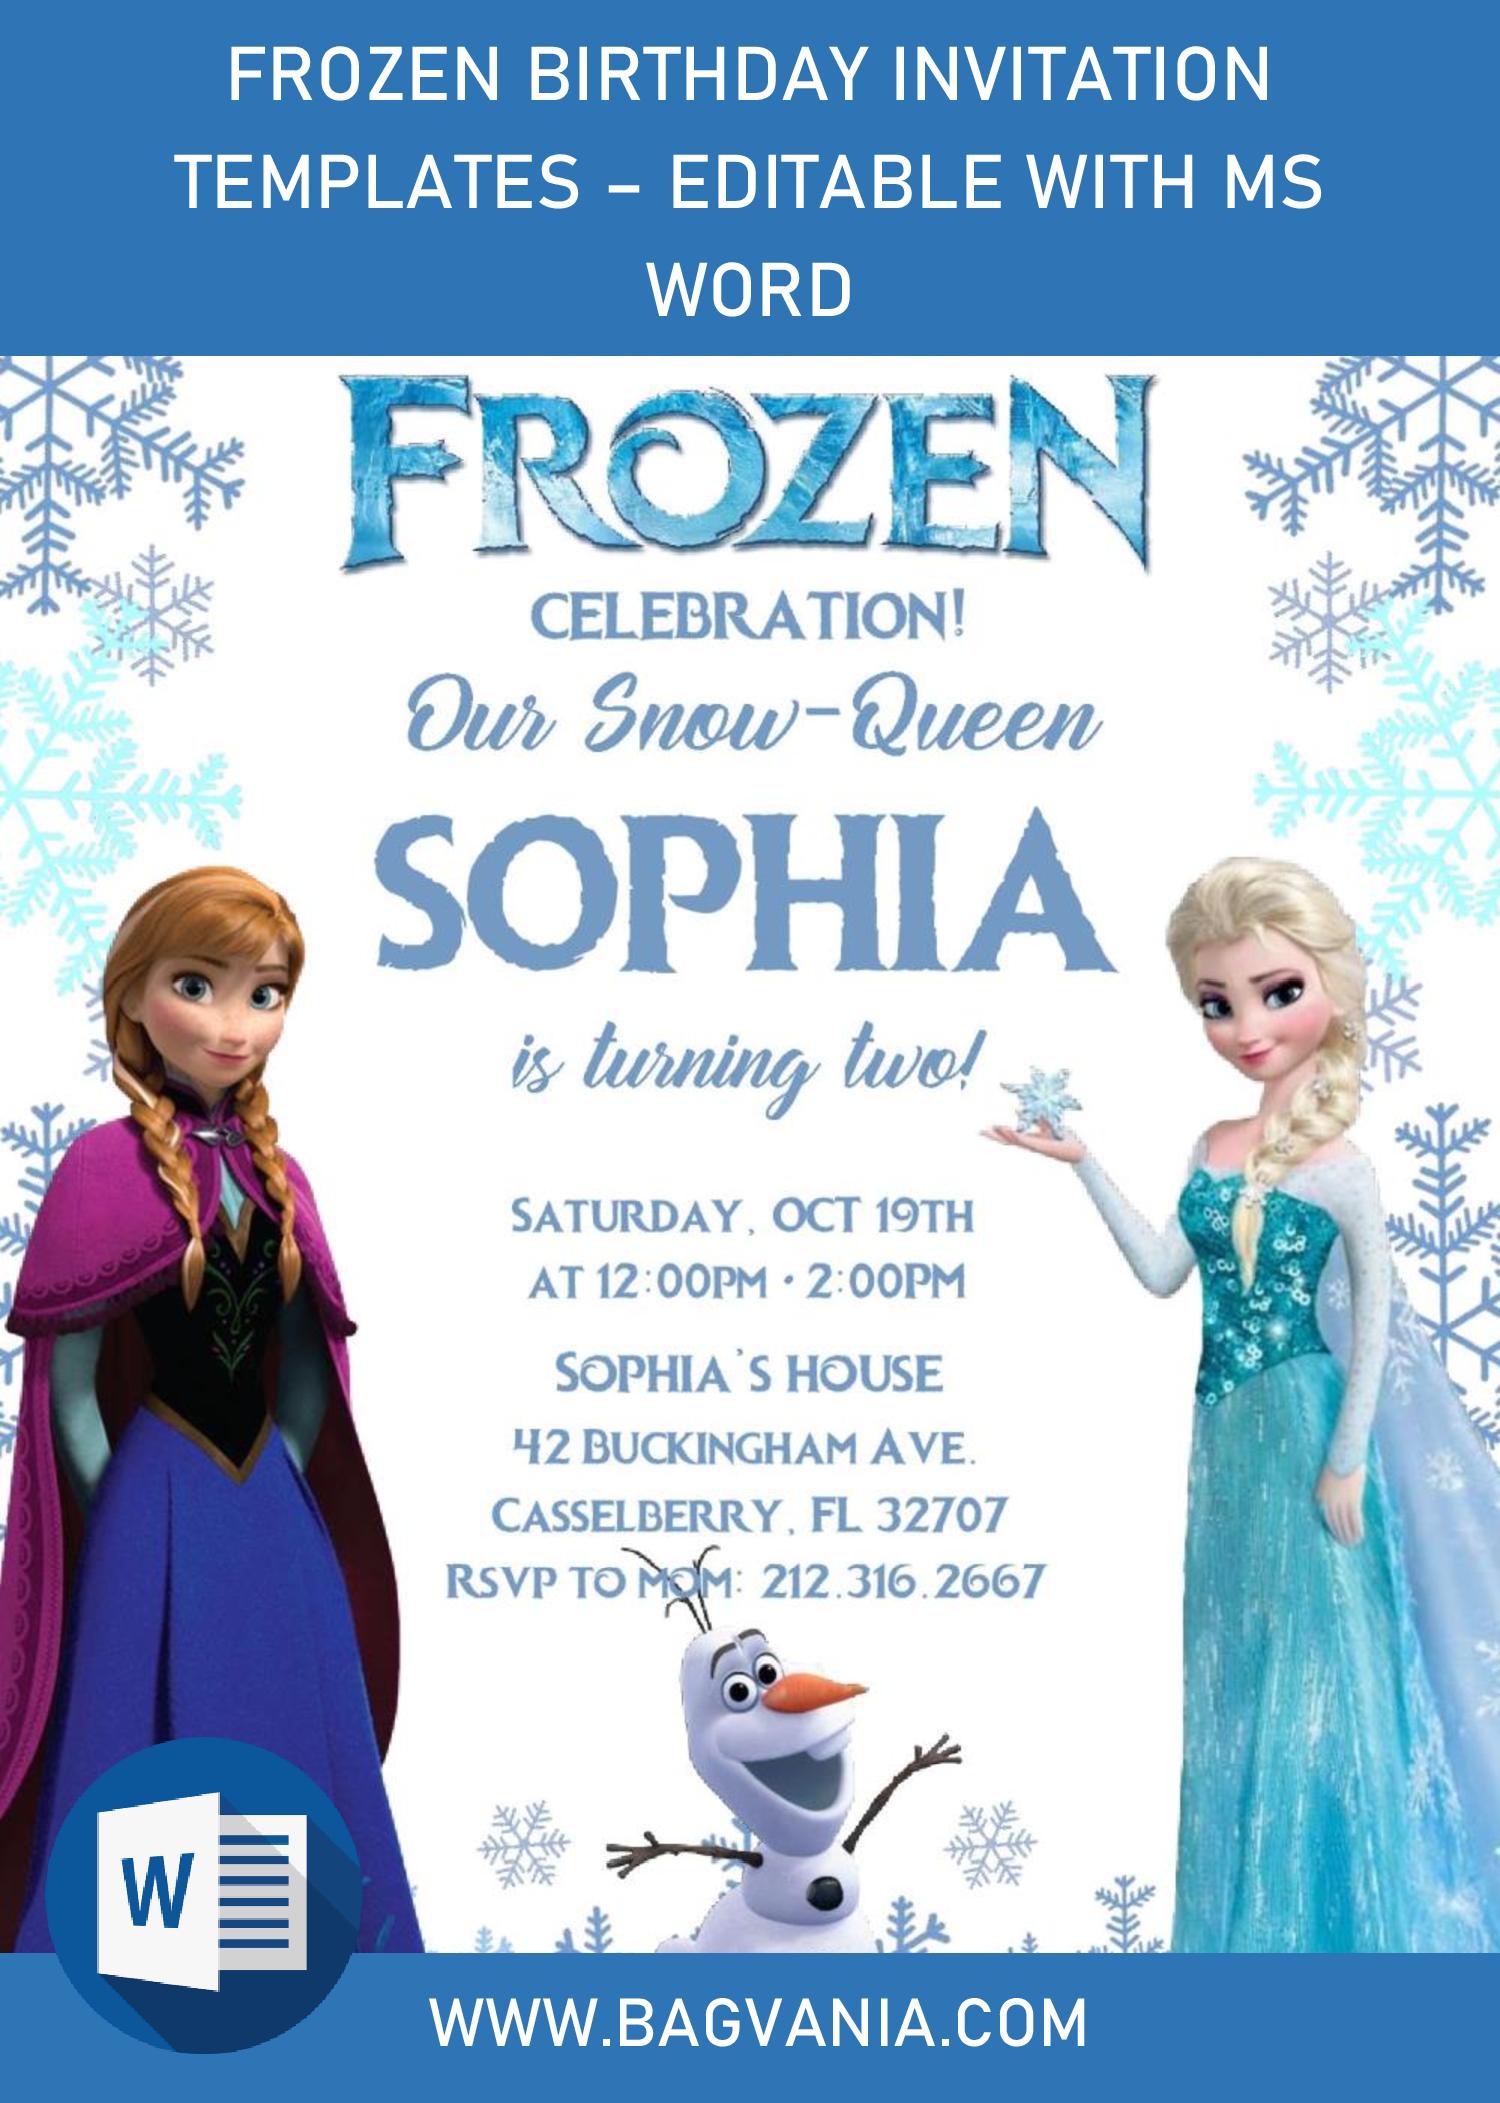 Frozen Invitation Templates – Editable With MS Word  FREE With Regard To Frozen Birthday Card Template